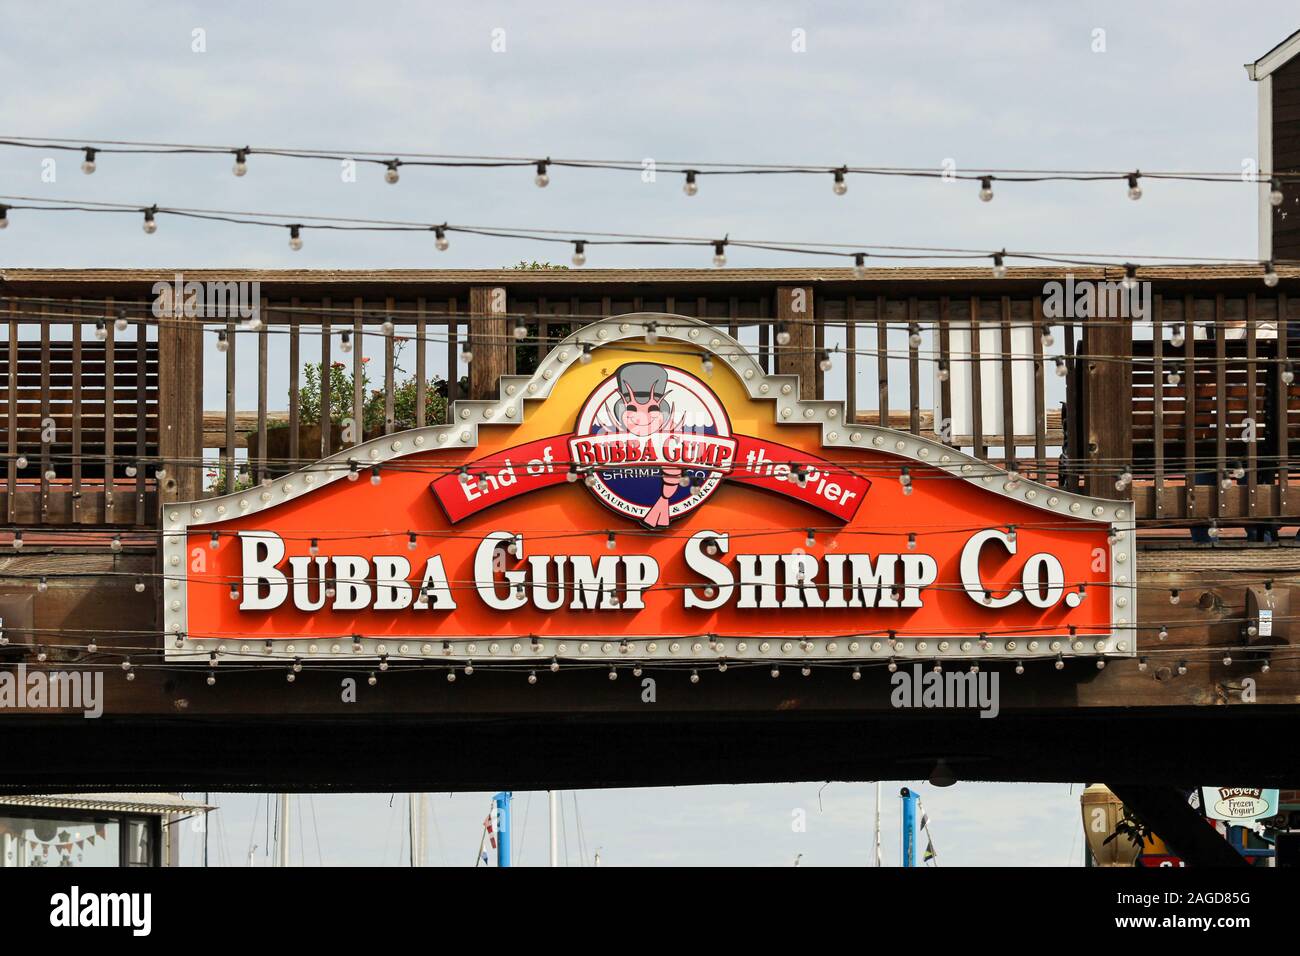 Bubba Gump Shrimp Co. sea food restaurant neon sign at Pier 39 of North Beach in San Francisco, United States of America Stock Photo